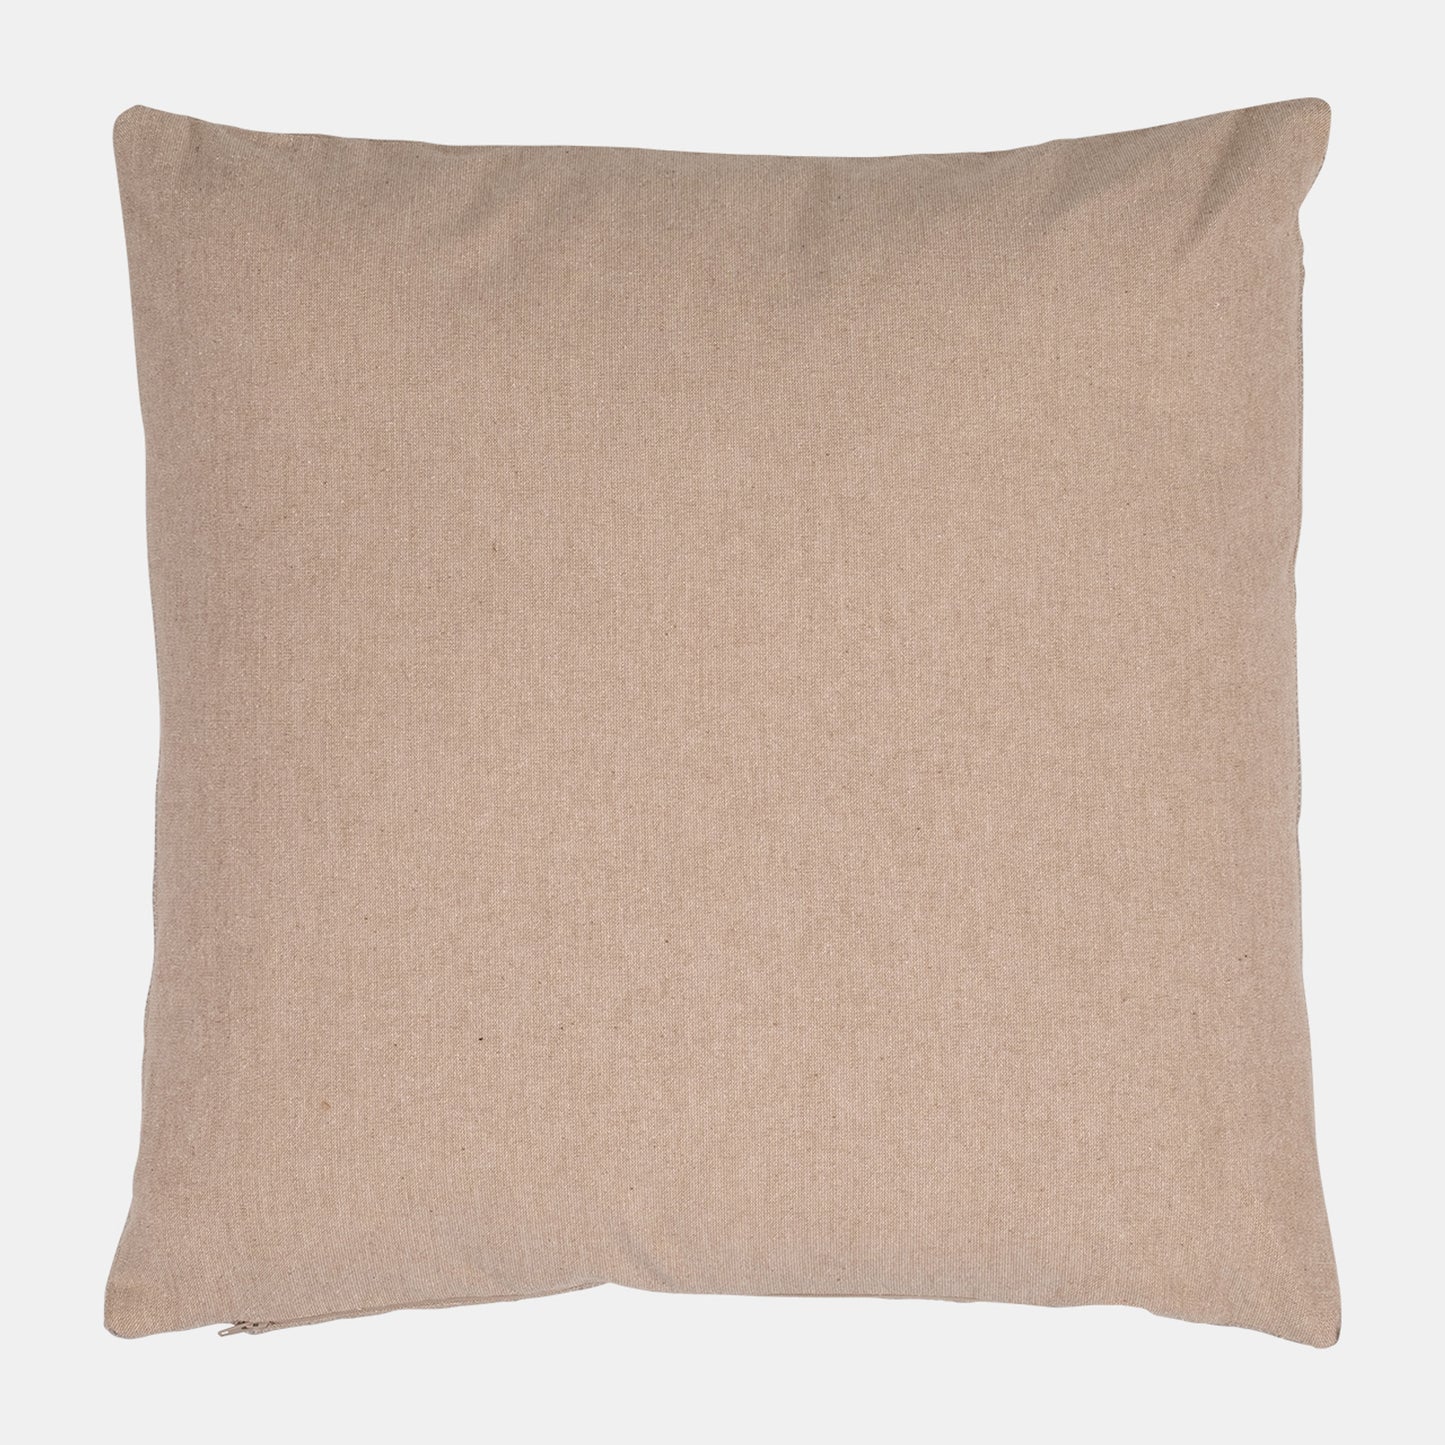 20 x 20 in. Leather Patch Decorative Square Pillow; Gray